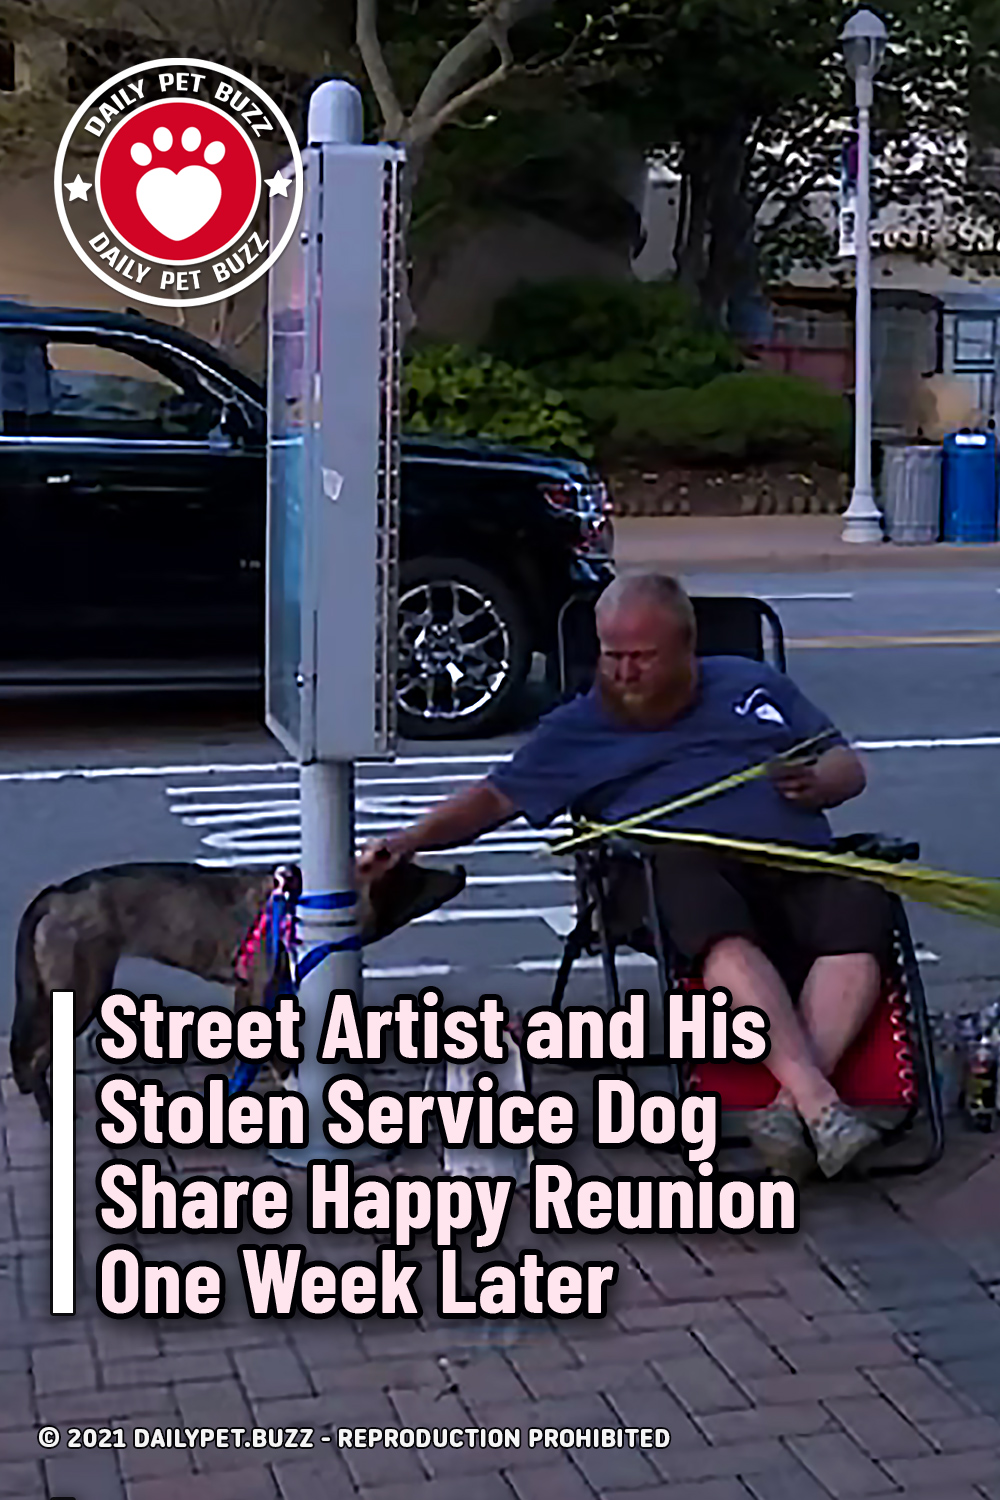 Street Artist and His Stolen Service Dog Share Happy Reunion One Week Later